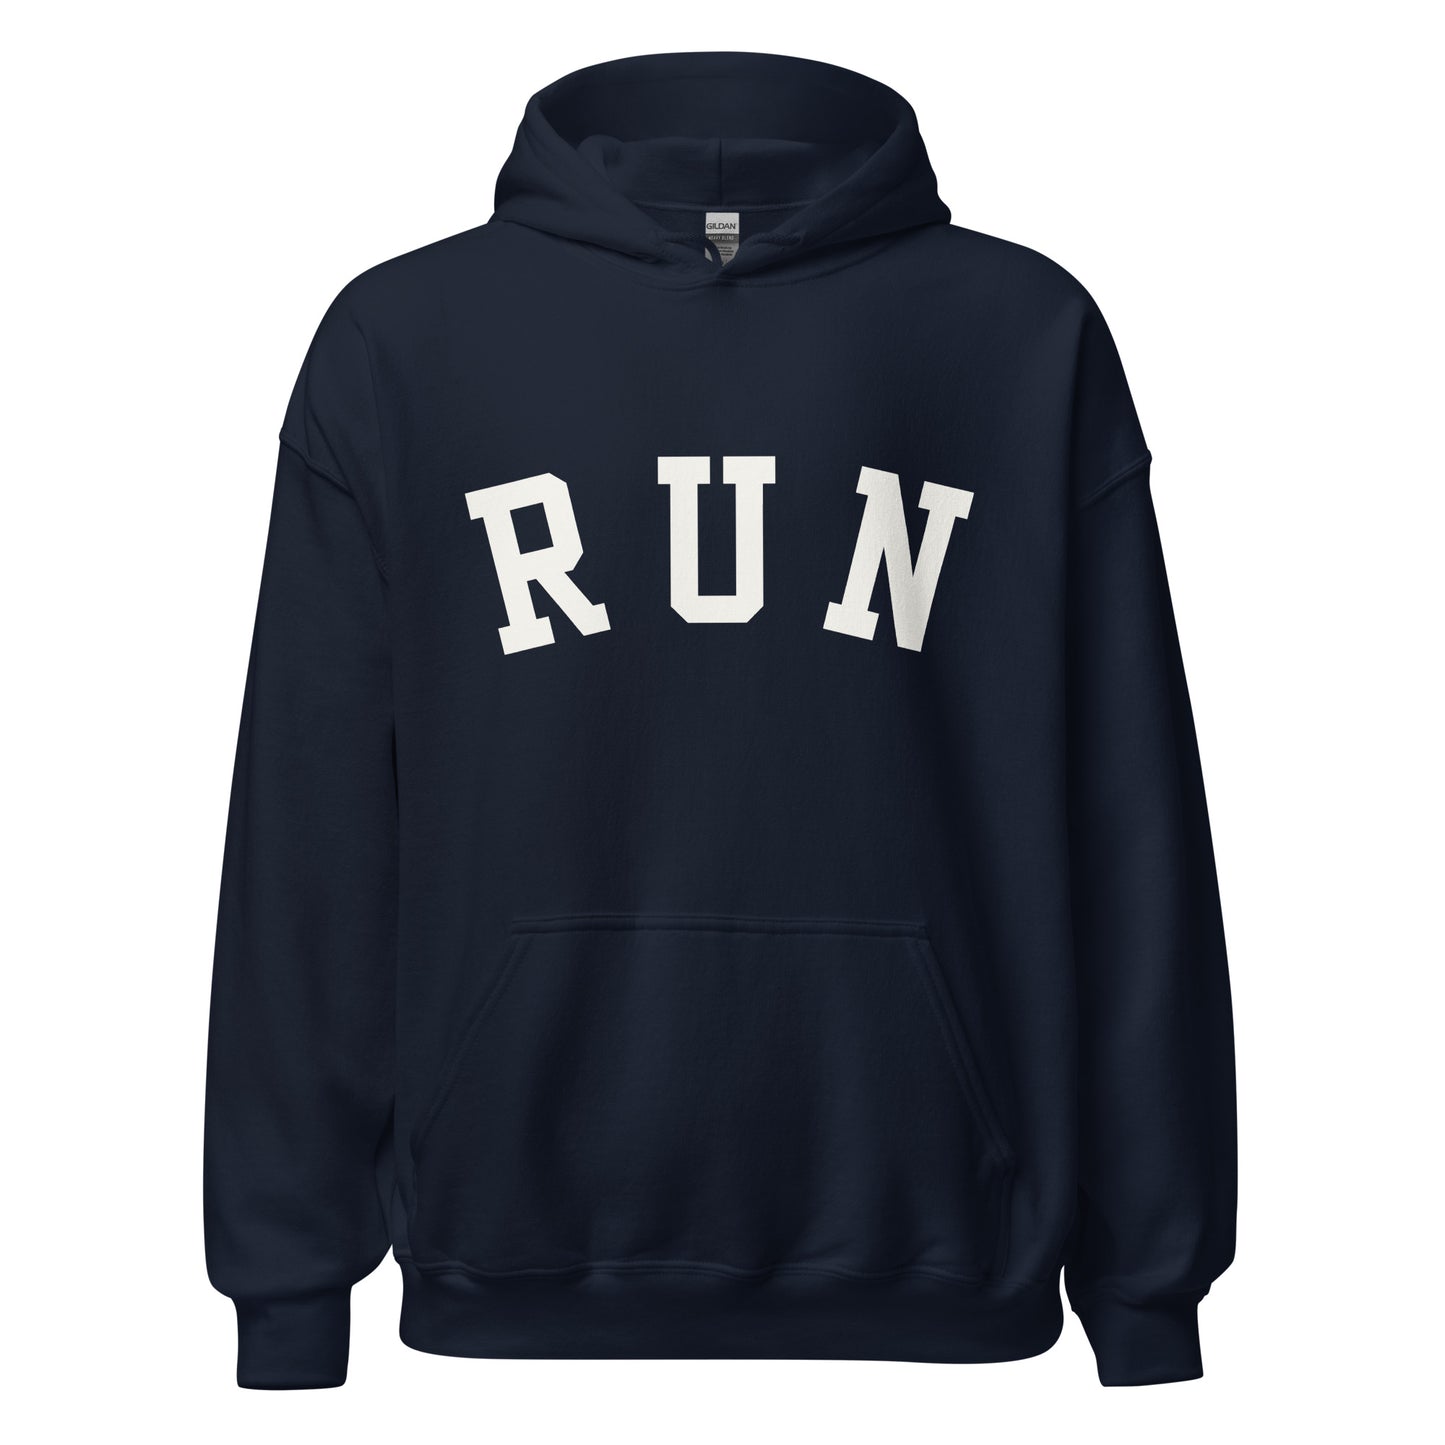 navy blue unisex hoodie with the word run across the chest in a white bold varsity style font